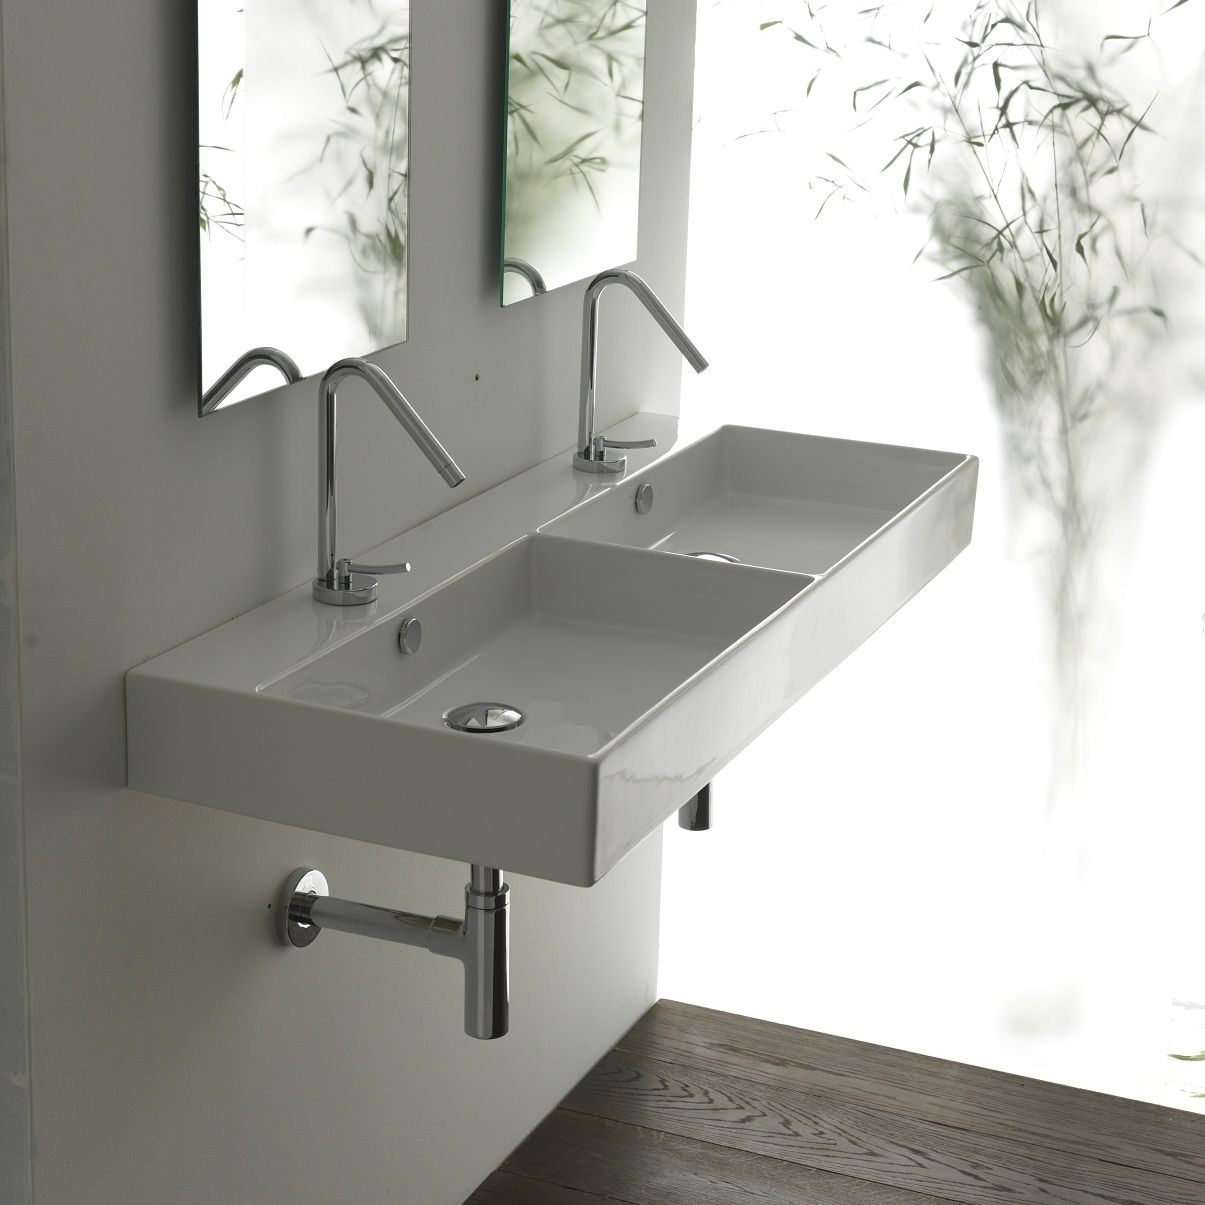 Bathroom Sinks Have Become Streamlined